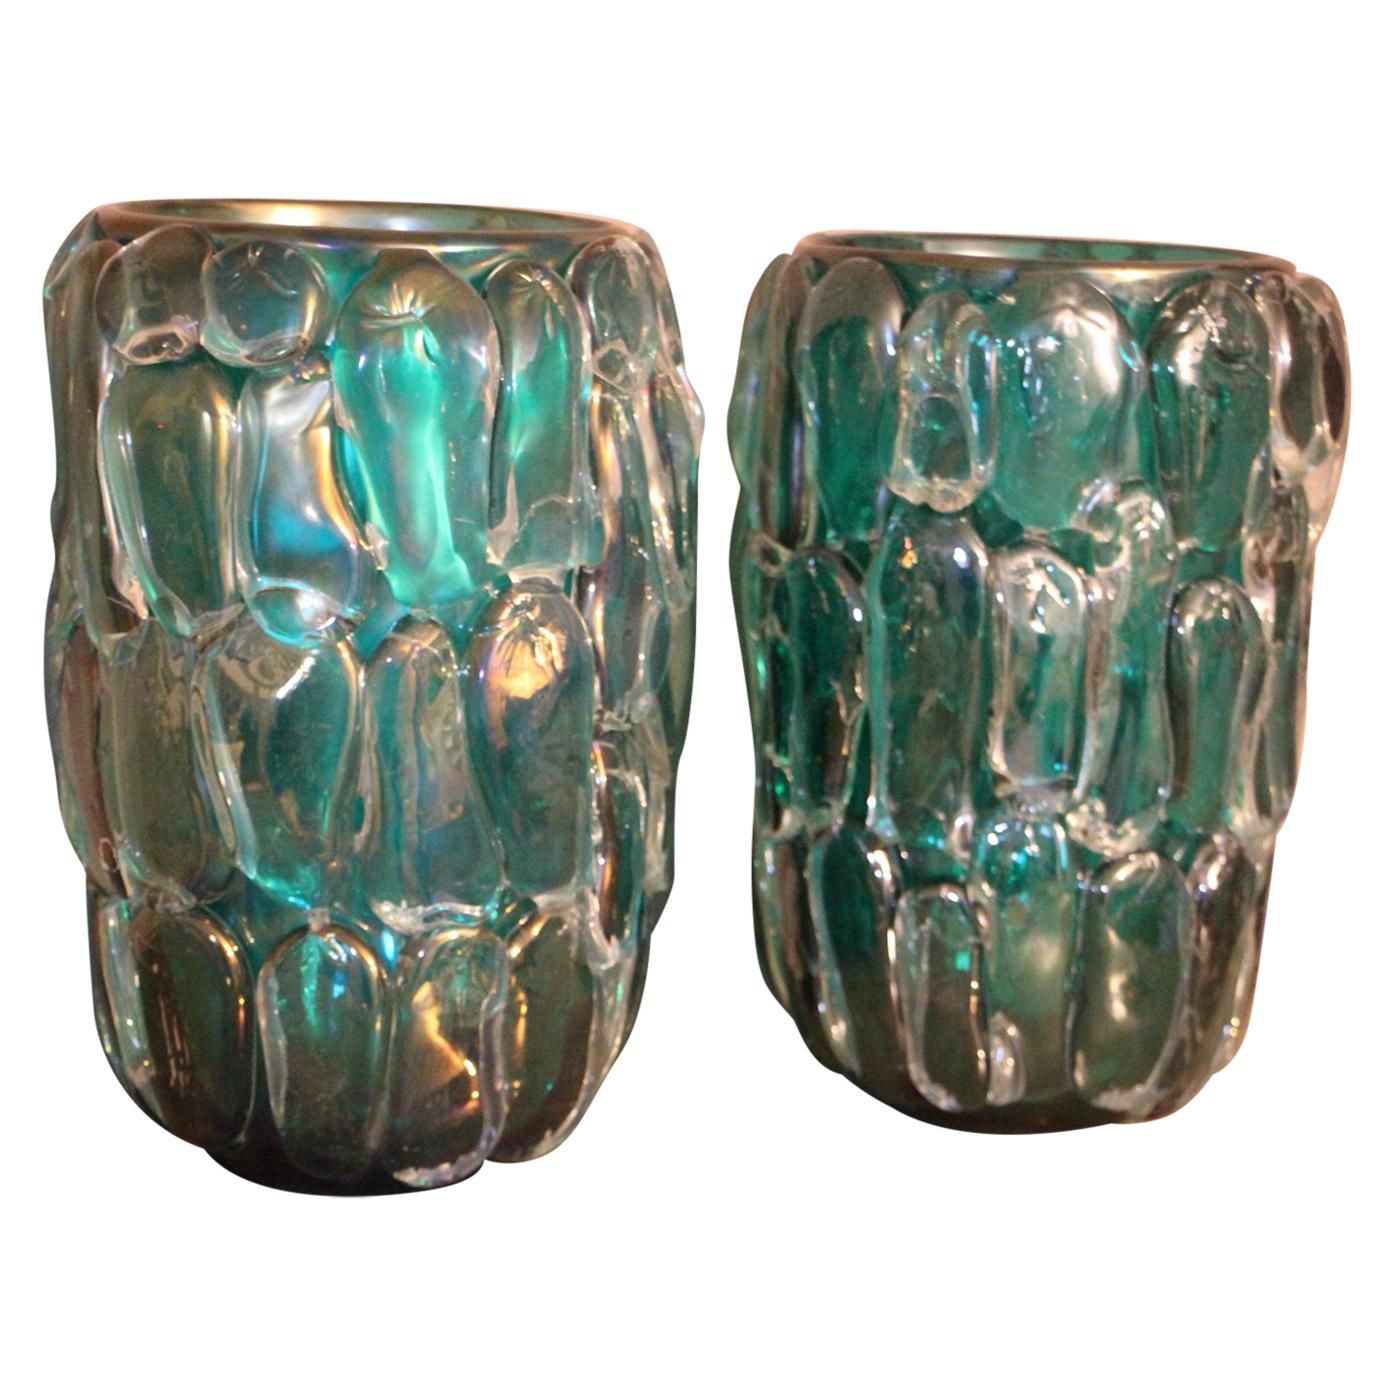 Pair of Large Emerald Green Color and Iridescent Murano Glass Vases by Cenedese